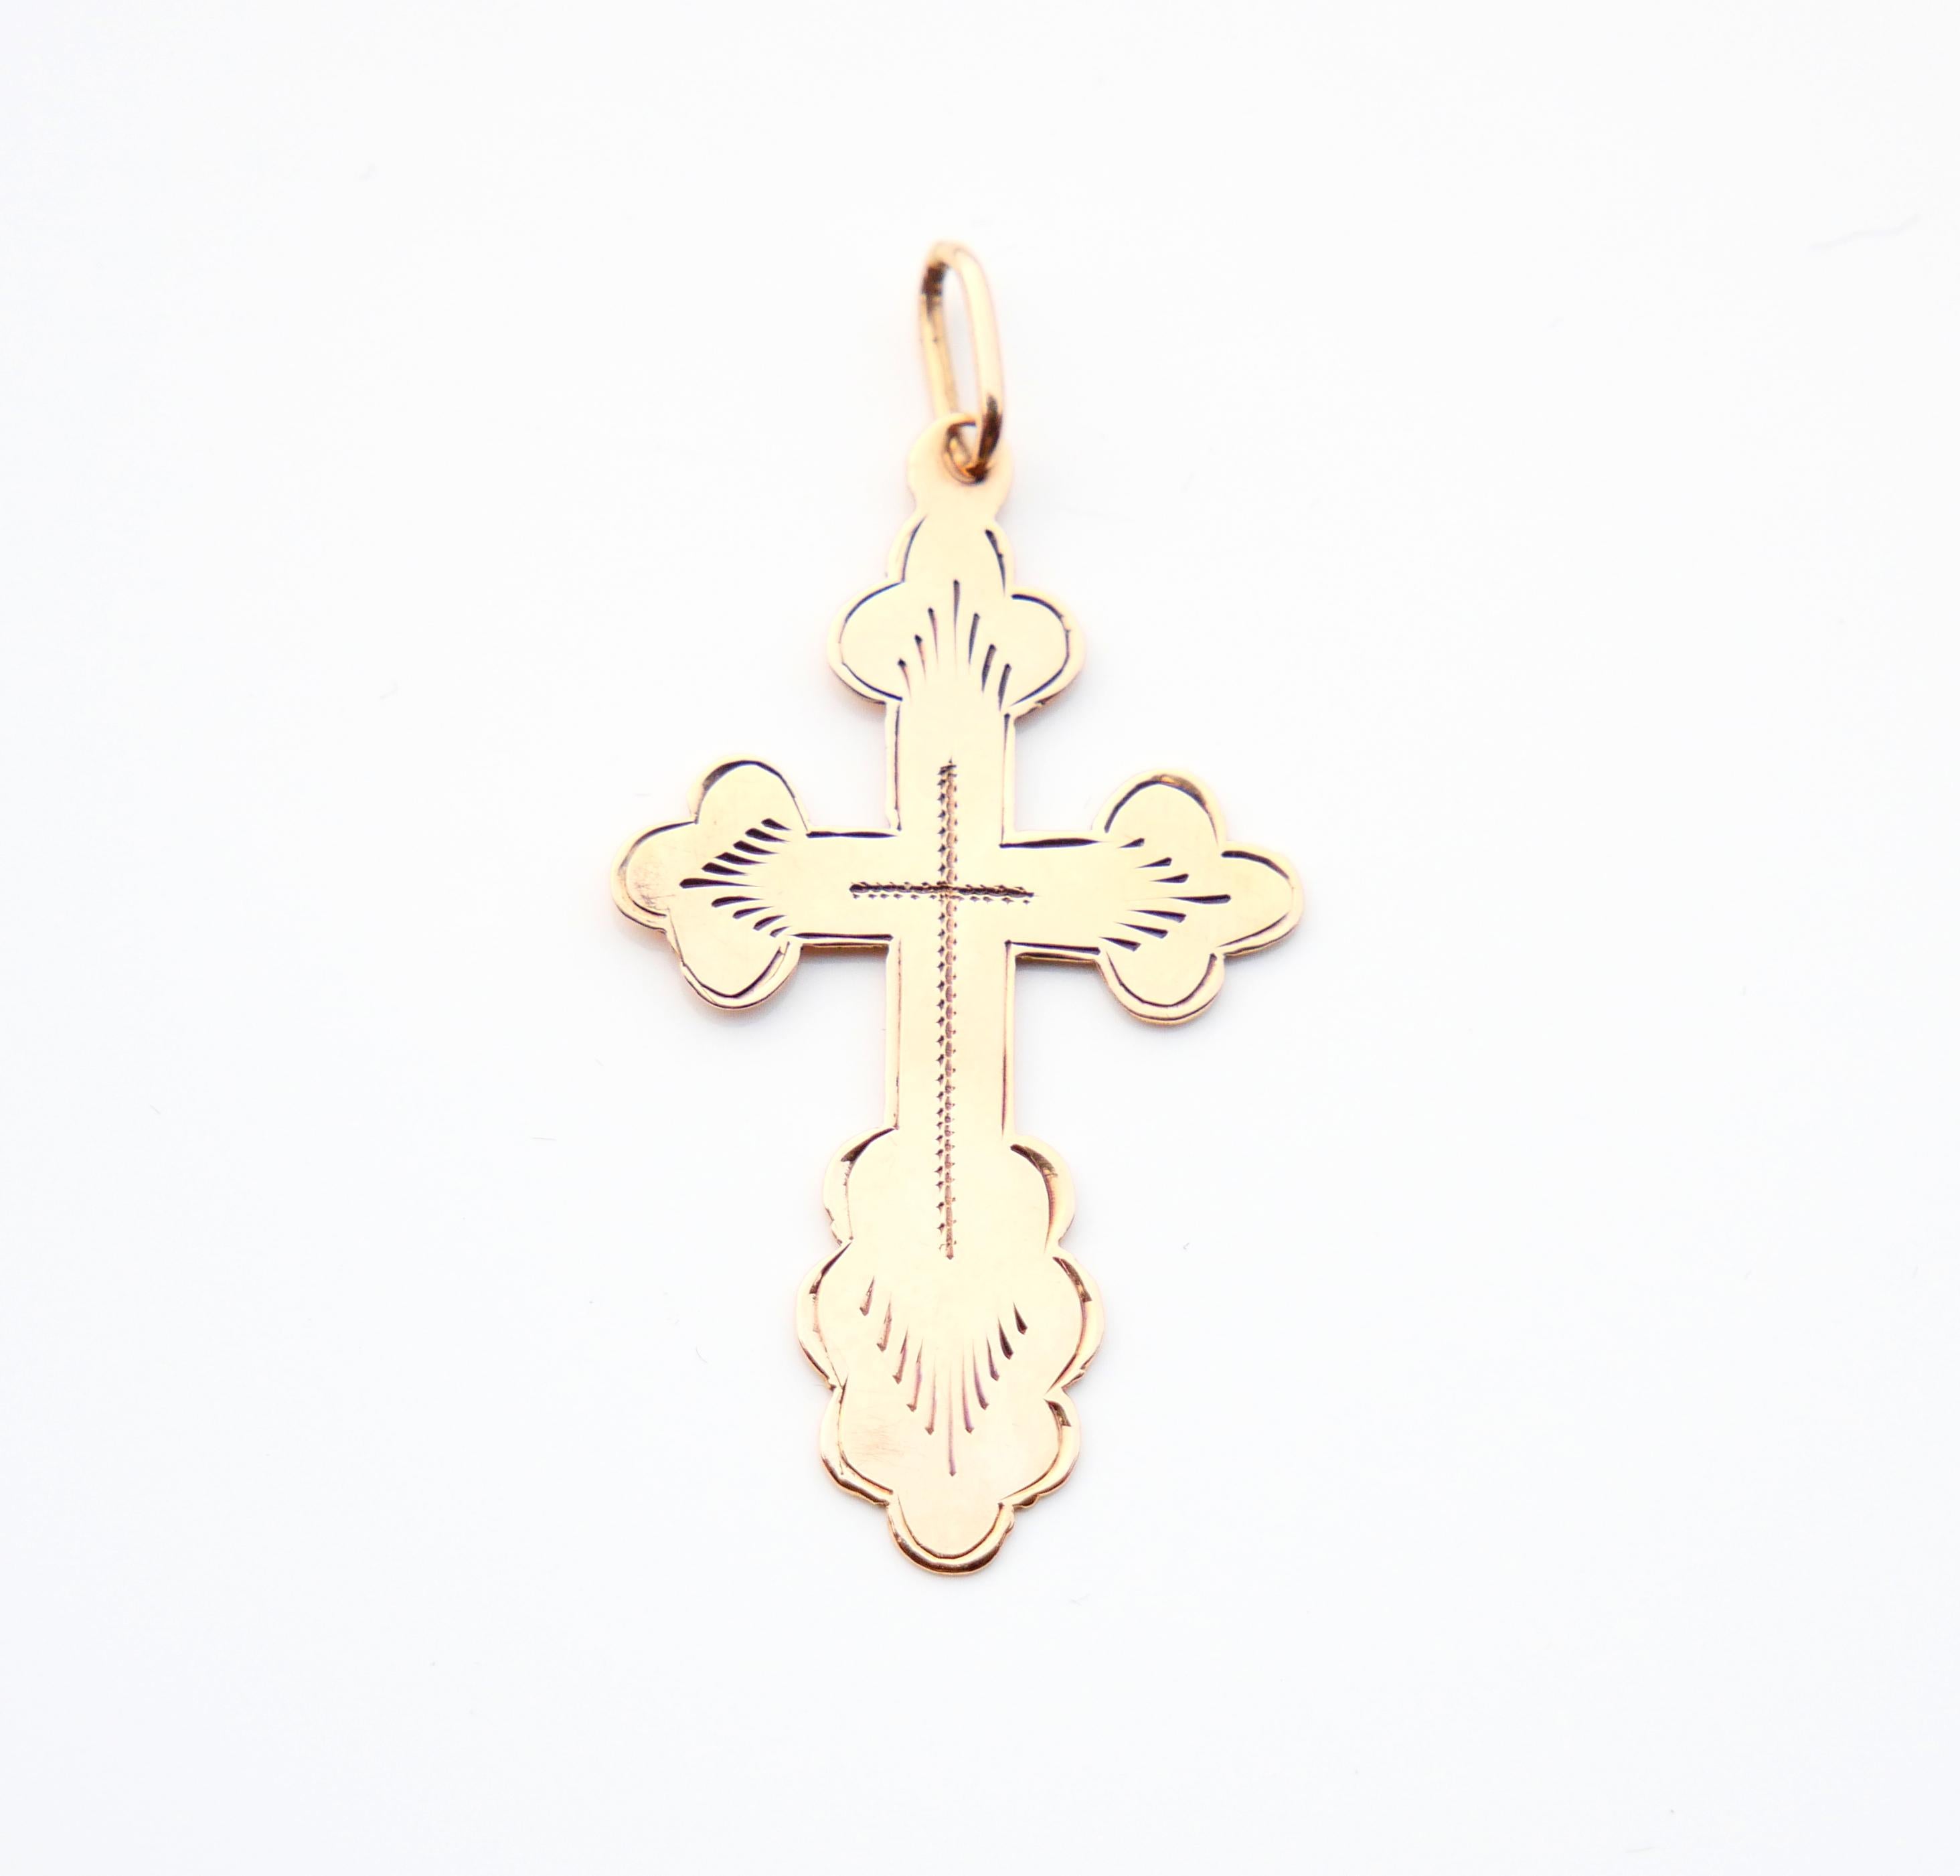 Russian / Georgian Orthodox Cross pendant in solid 56 / 14K Gold. Delicate hand - engraved ornament.

Hallmarked with old Russian Imperial Gold standard 56 zolotniks (14K) used between 1908 -1917. Assay of Tiflis (Tbilisi) city, Russian